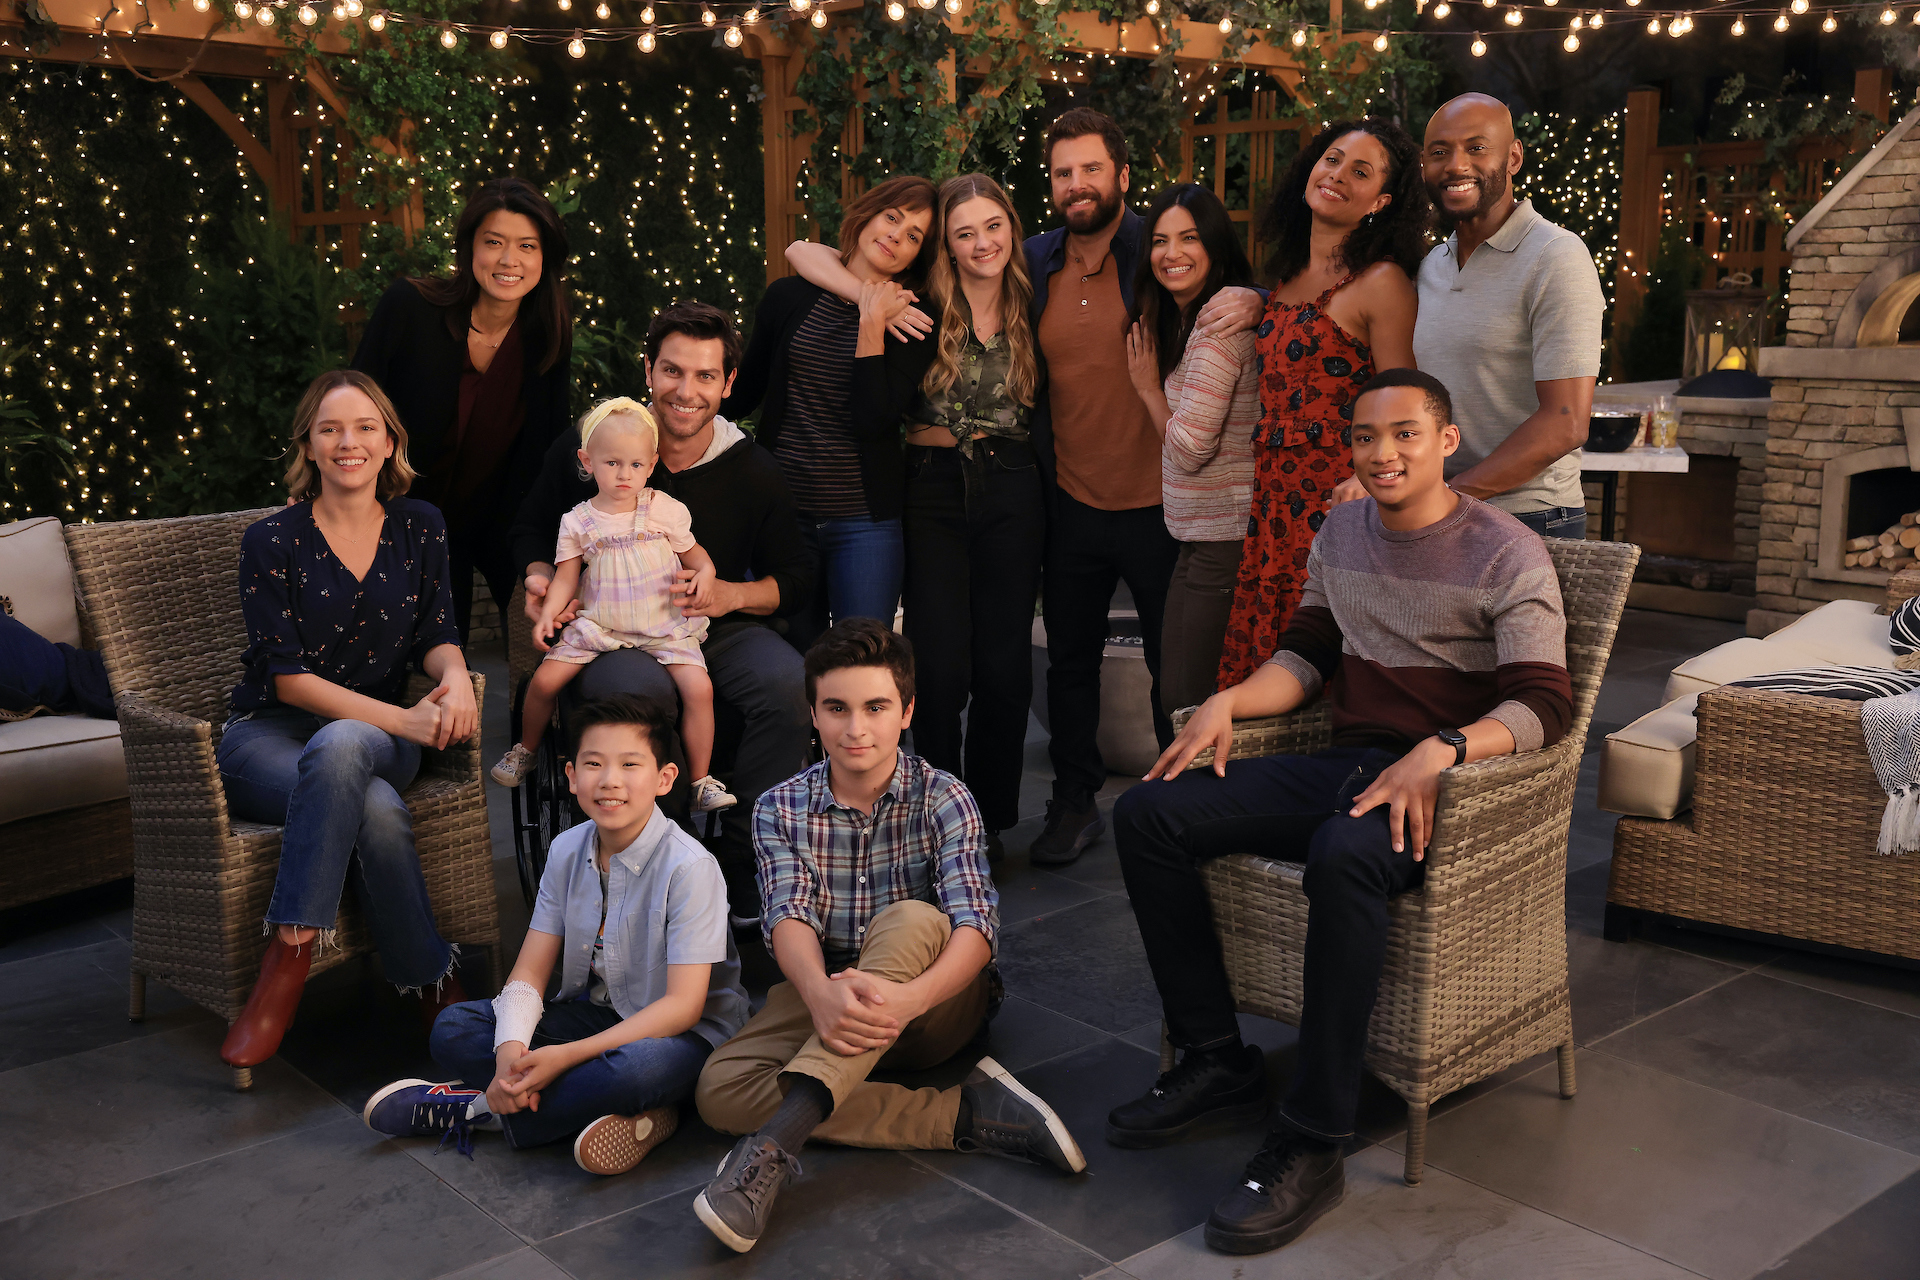 ABC drama's 'A Million Little Things' is concluding after five seasons. Creator DJ Nash confirmed that the series' upcoming season will be its last.